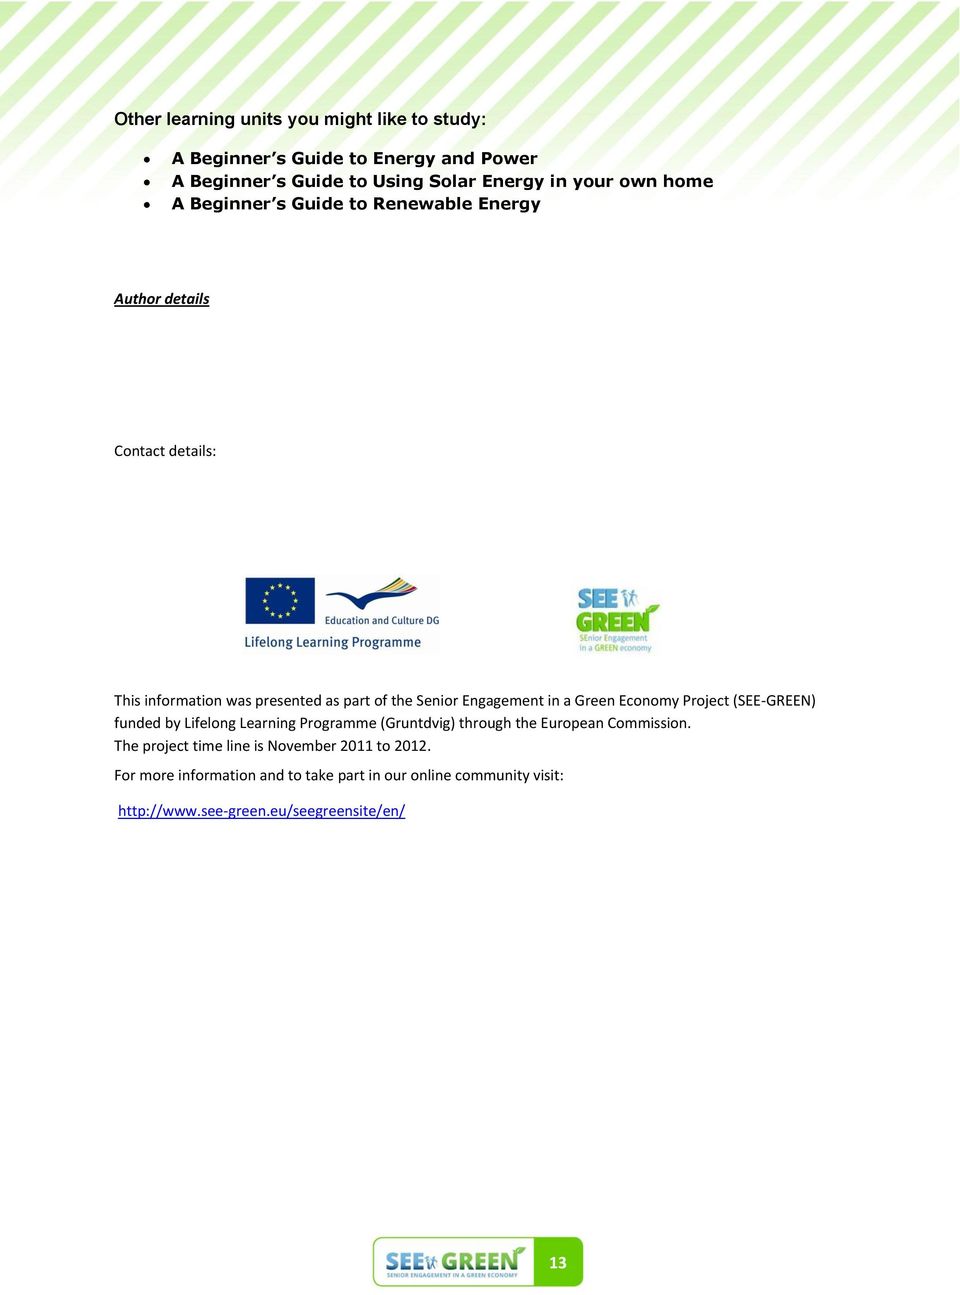 in a Green Economy Project (SEE-GREEN) funded by Lifelong Learning Programme (Gruntdvig) through the European Commission.